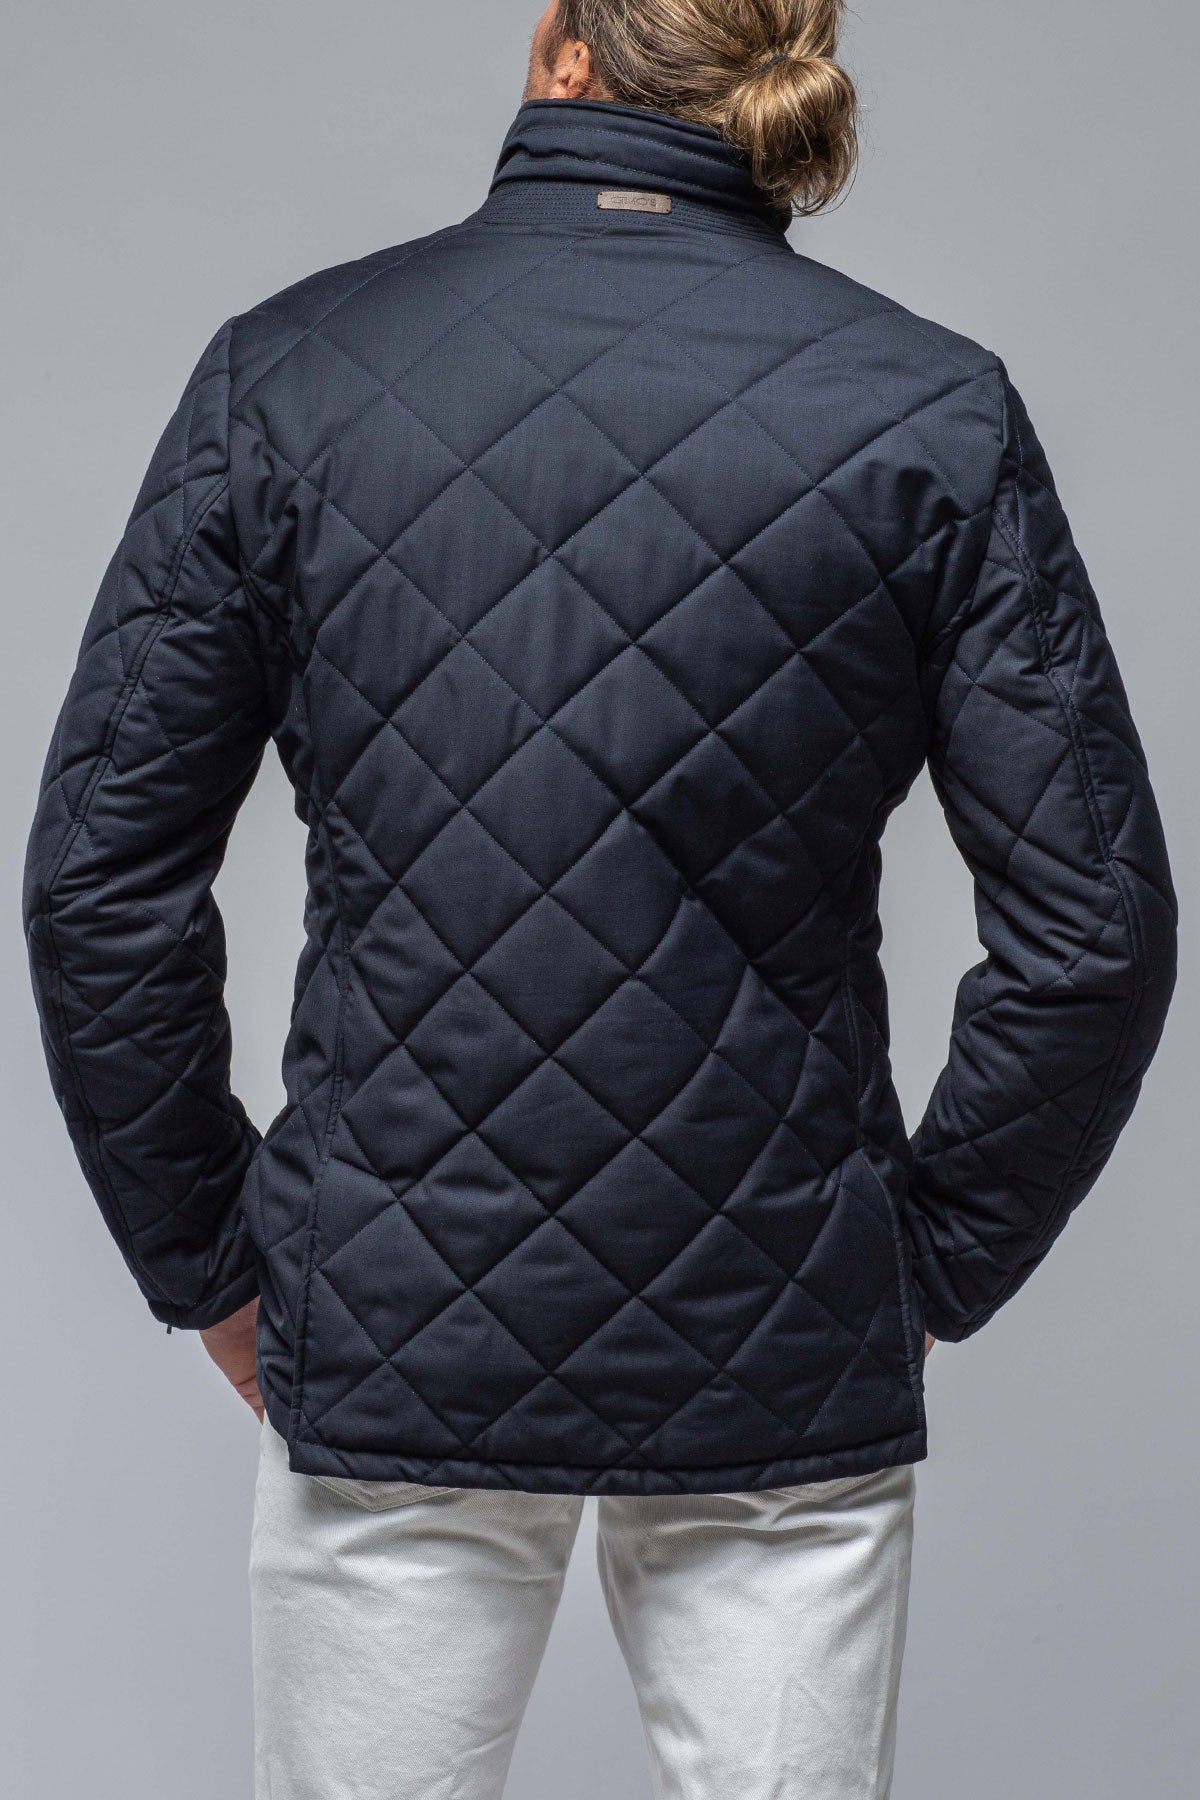 Rochester Chelsea Jacket | Warehouse - Mens - Outerwear - Cloth | Gimo's